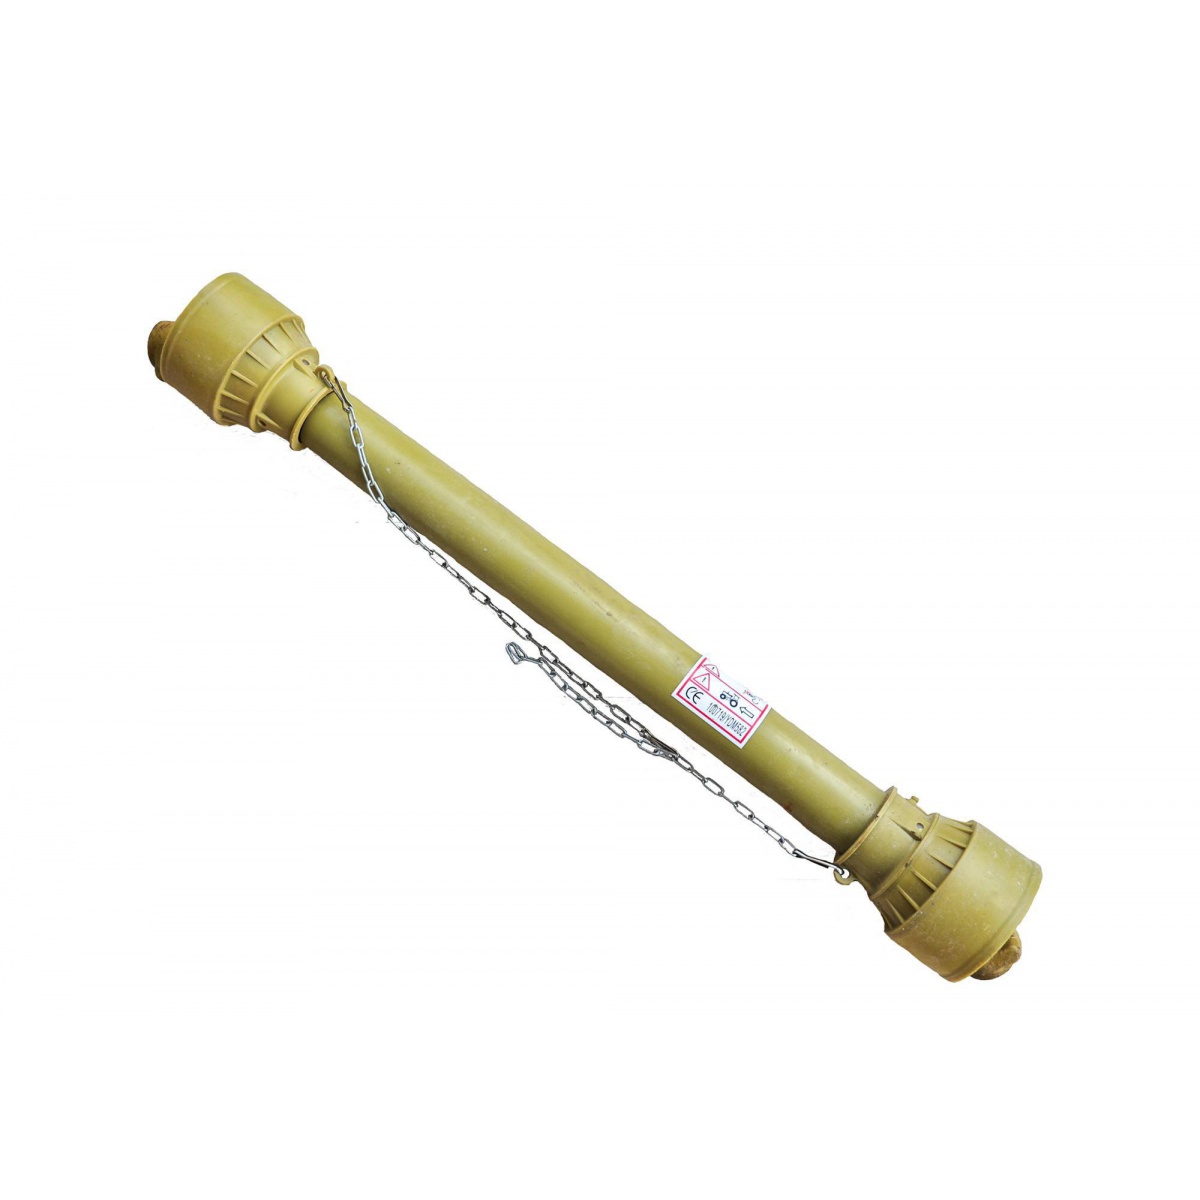 025b up to 24km and 130nm - PTO shaft 025B - 60cm / up to 24 HP